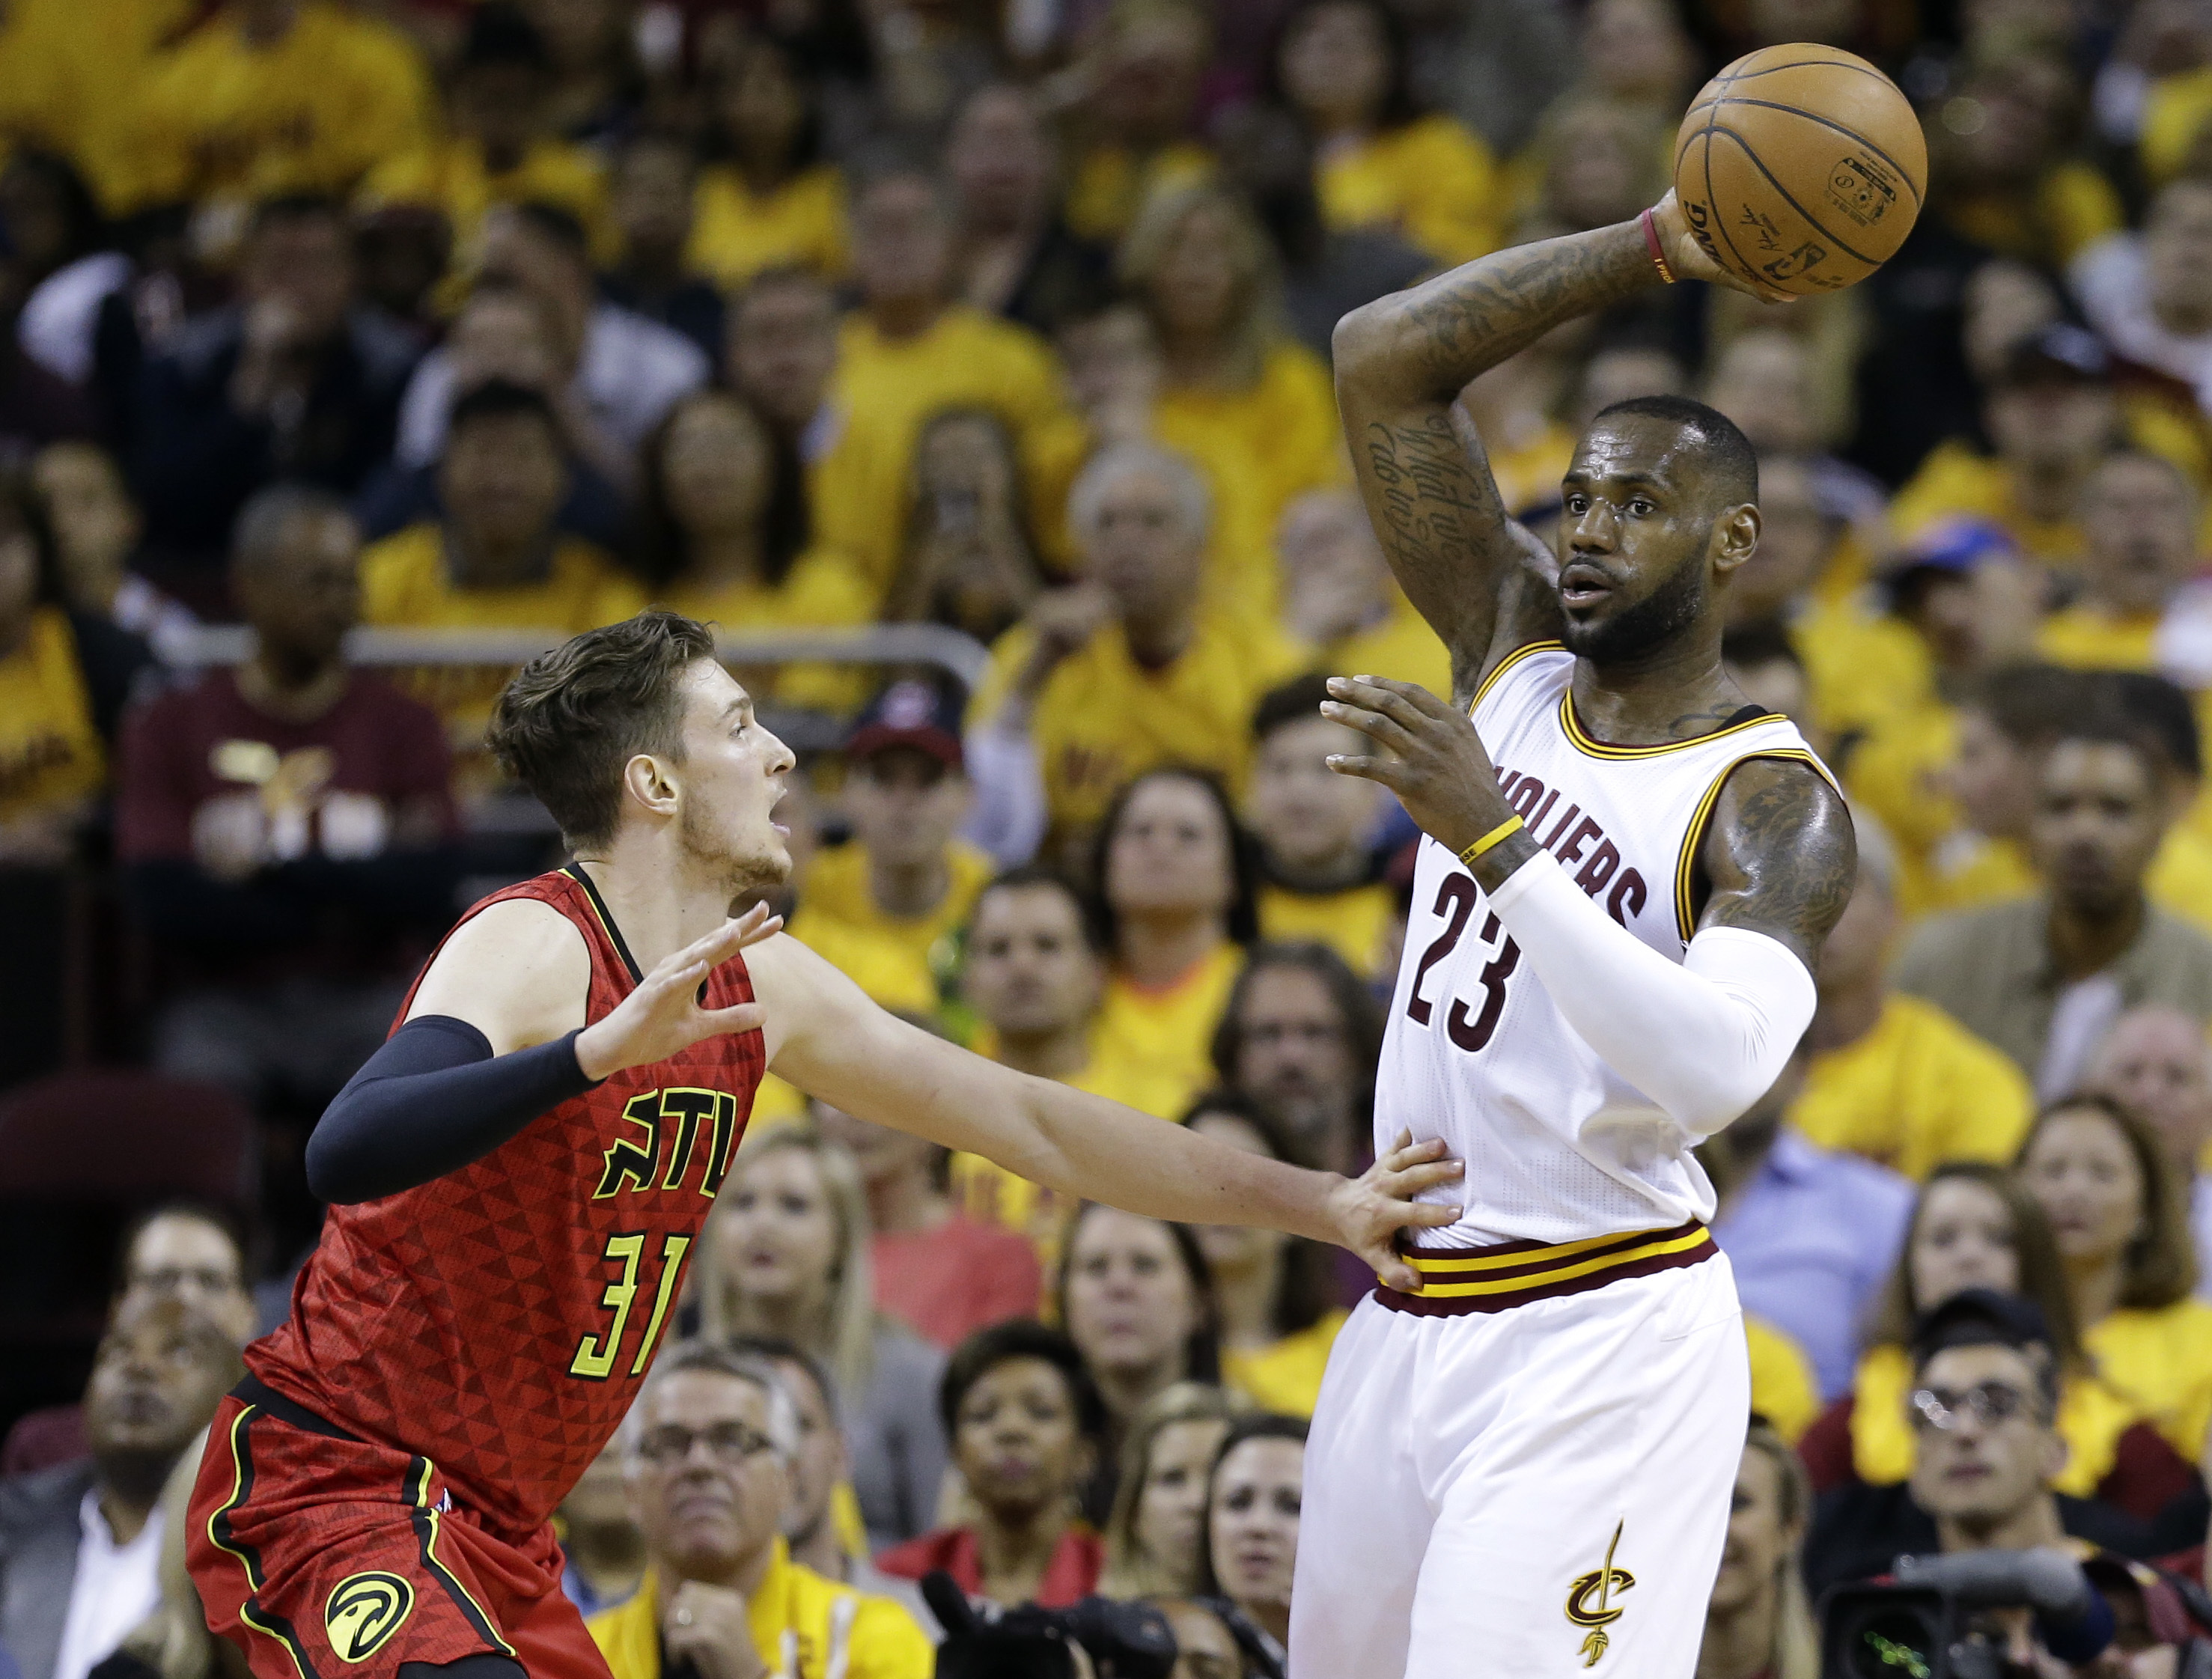 Cleveland Cavaliers forward LeBron James (23) looks for an open teammate against Atlanta Hawks forward Mike Muscala (31) in the first half during Game 2 of a second-round NBA basketball playoff series, Wednesday, May 4, 2016, in Cleveland. AP